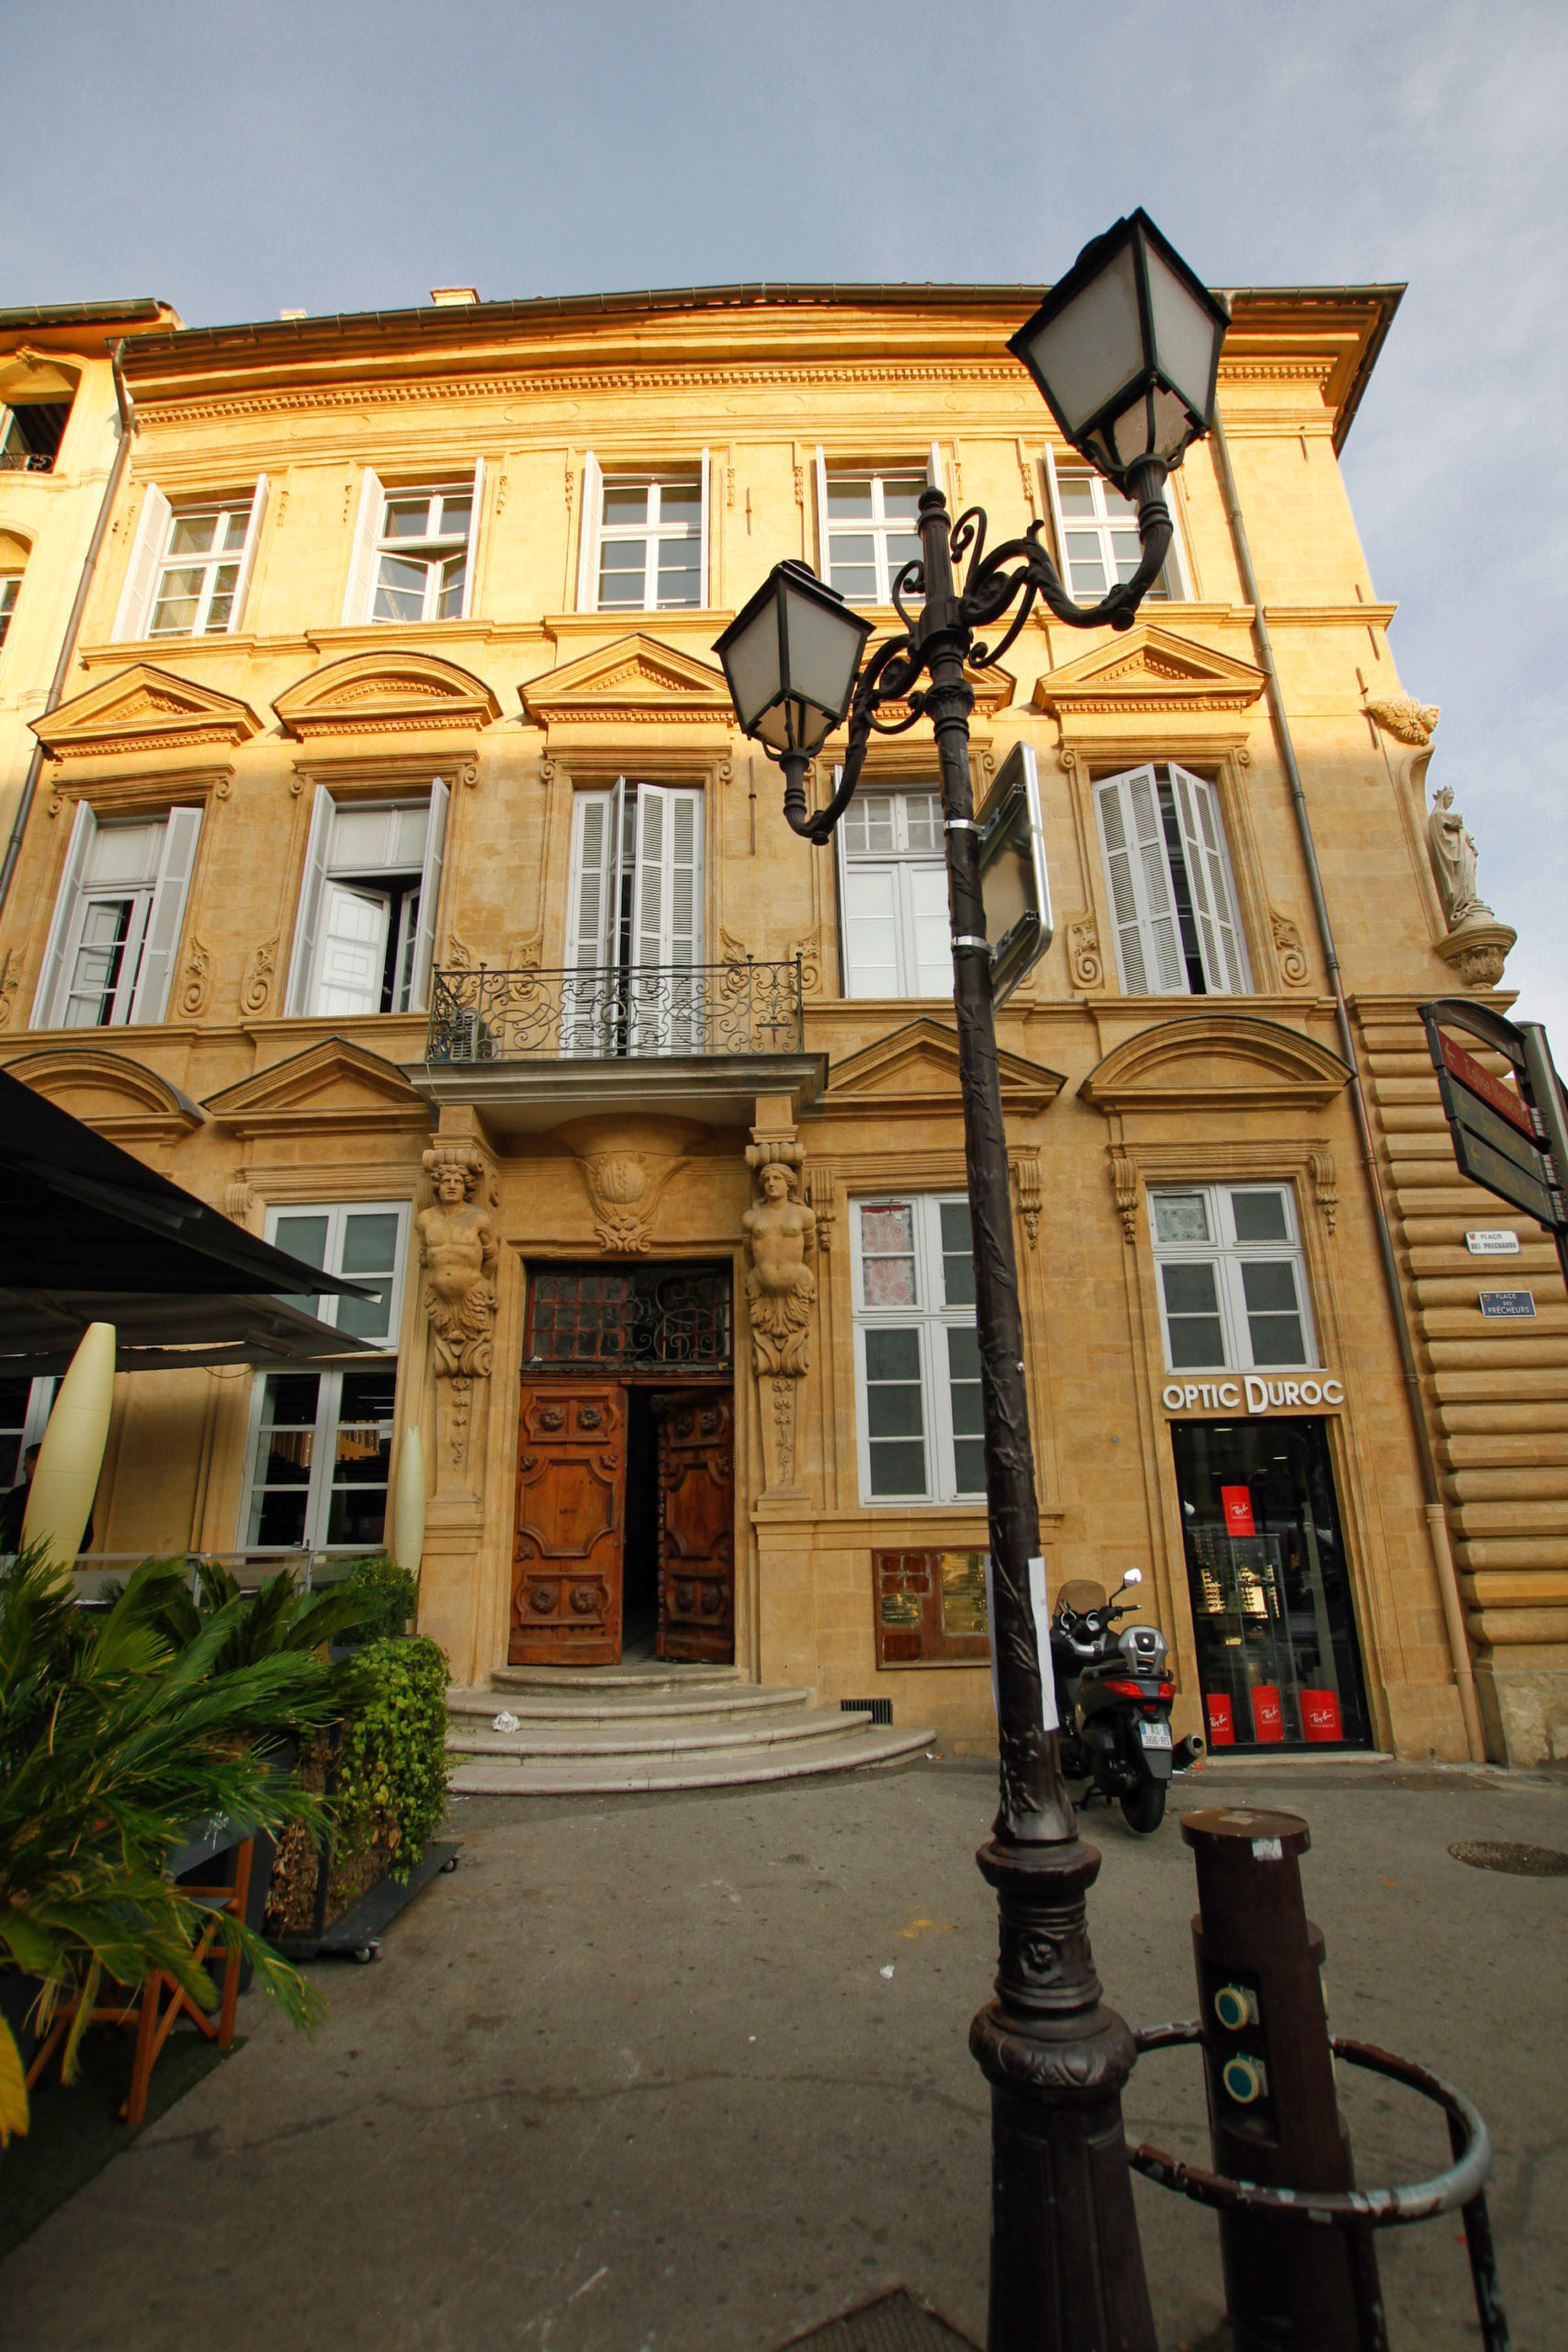 Aix-en-Provence Old Town: Hôtel d'Agut © Lsmpascal - licence [CC BY-SA 3.0] from Wikimedia Commons